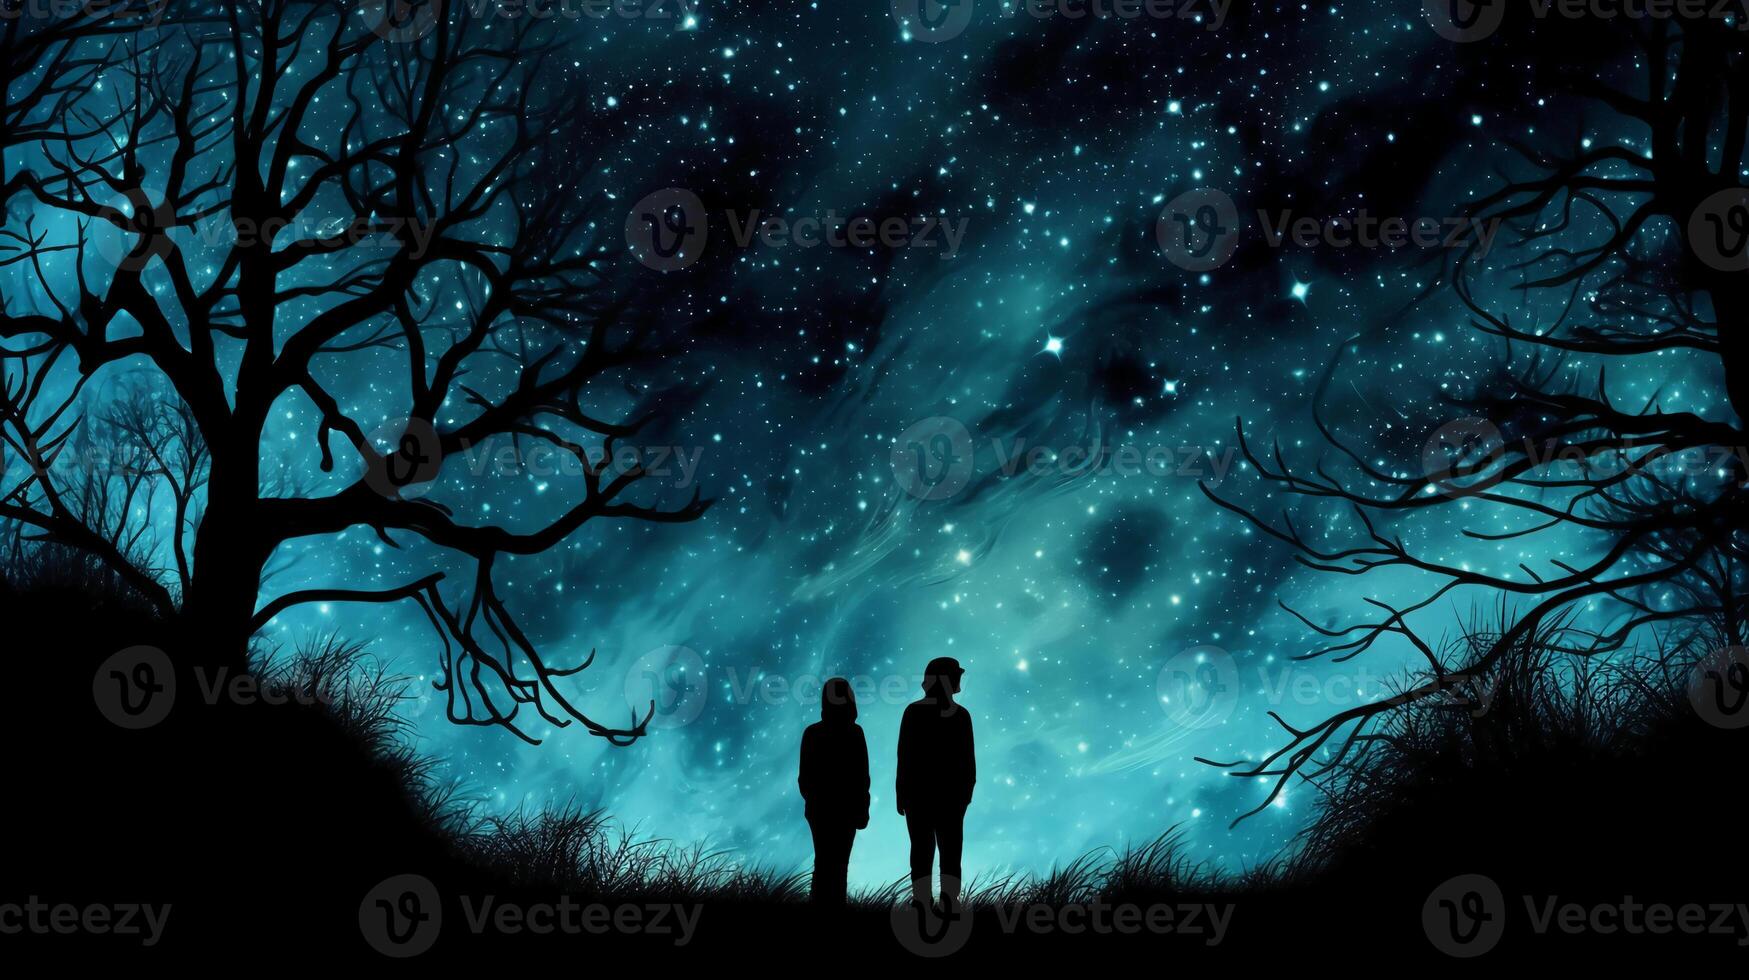 Silhouettes of two stargazing woman saying goodby, surrounded by trees and the contour of london city in the background. photo